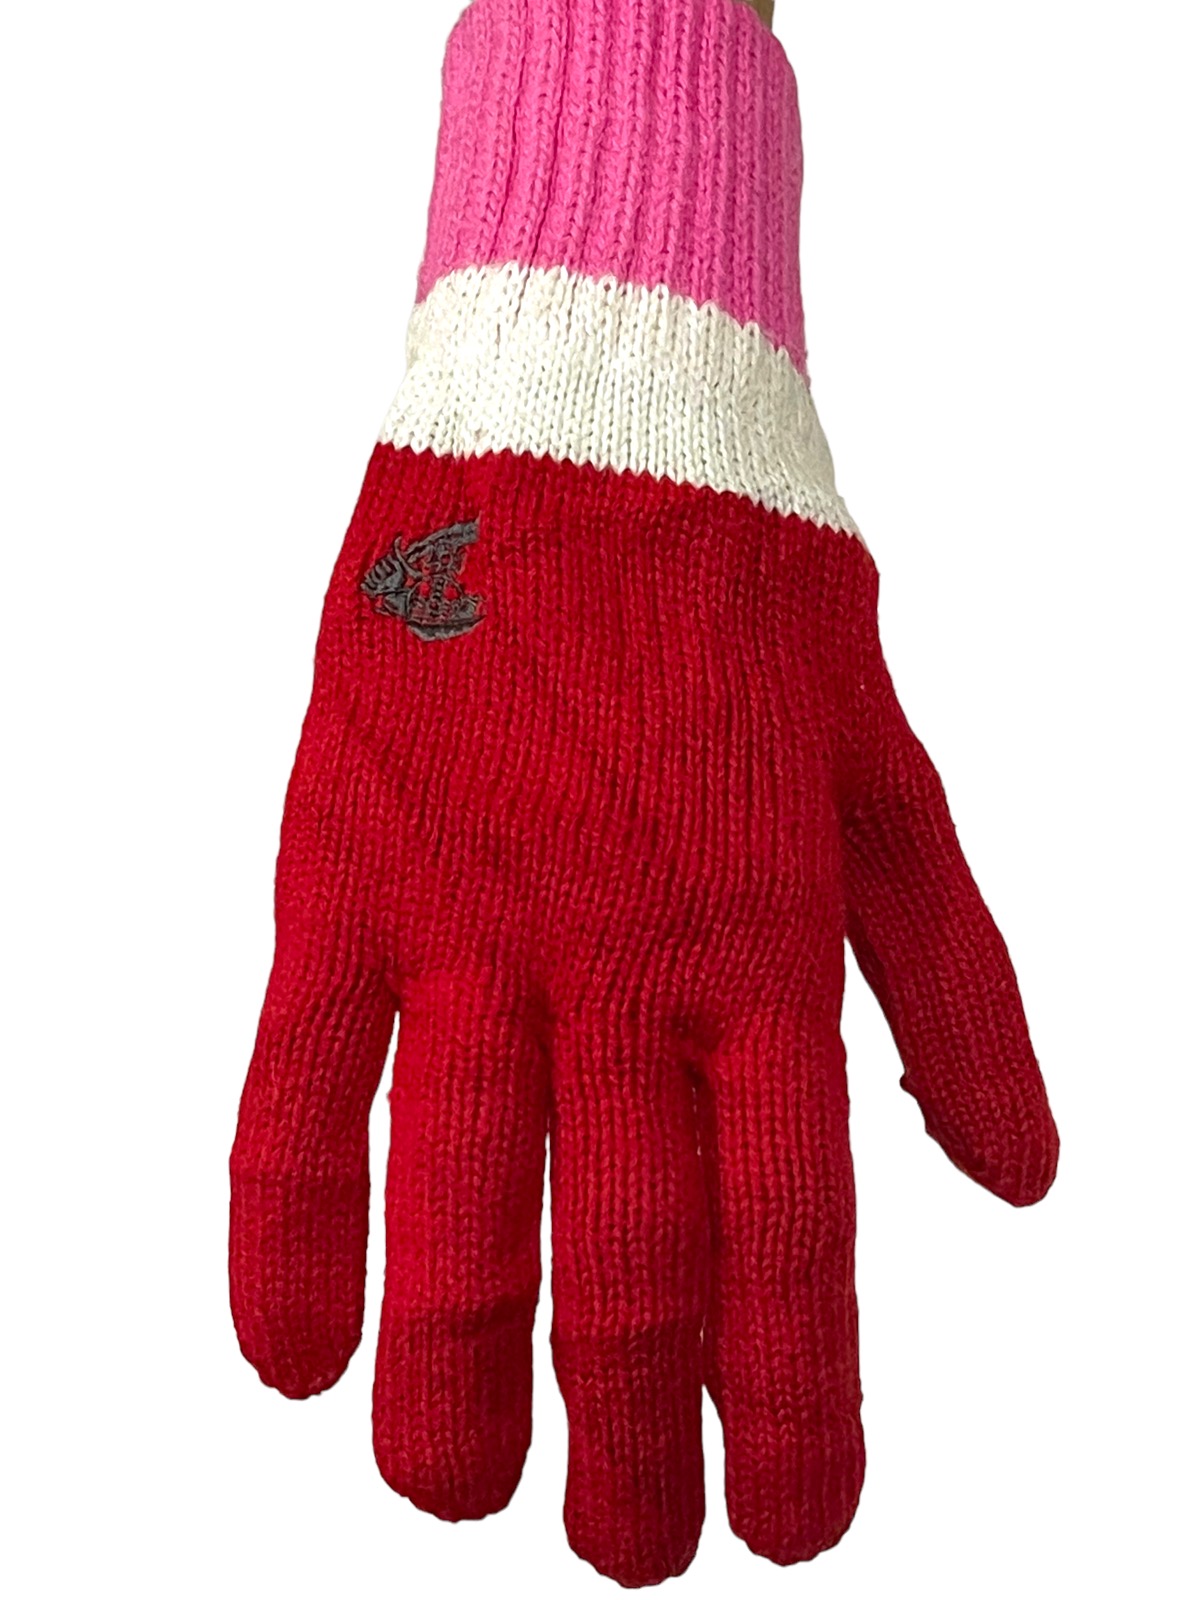 Vivienne Westwood Anglomania Gloves - 3